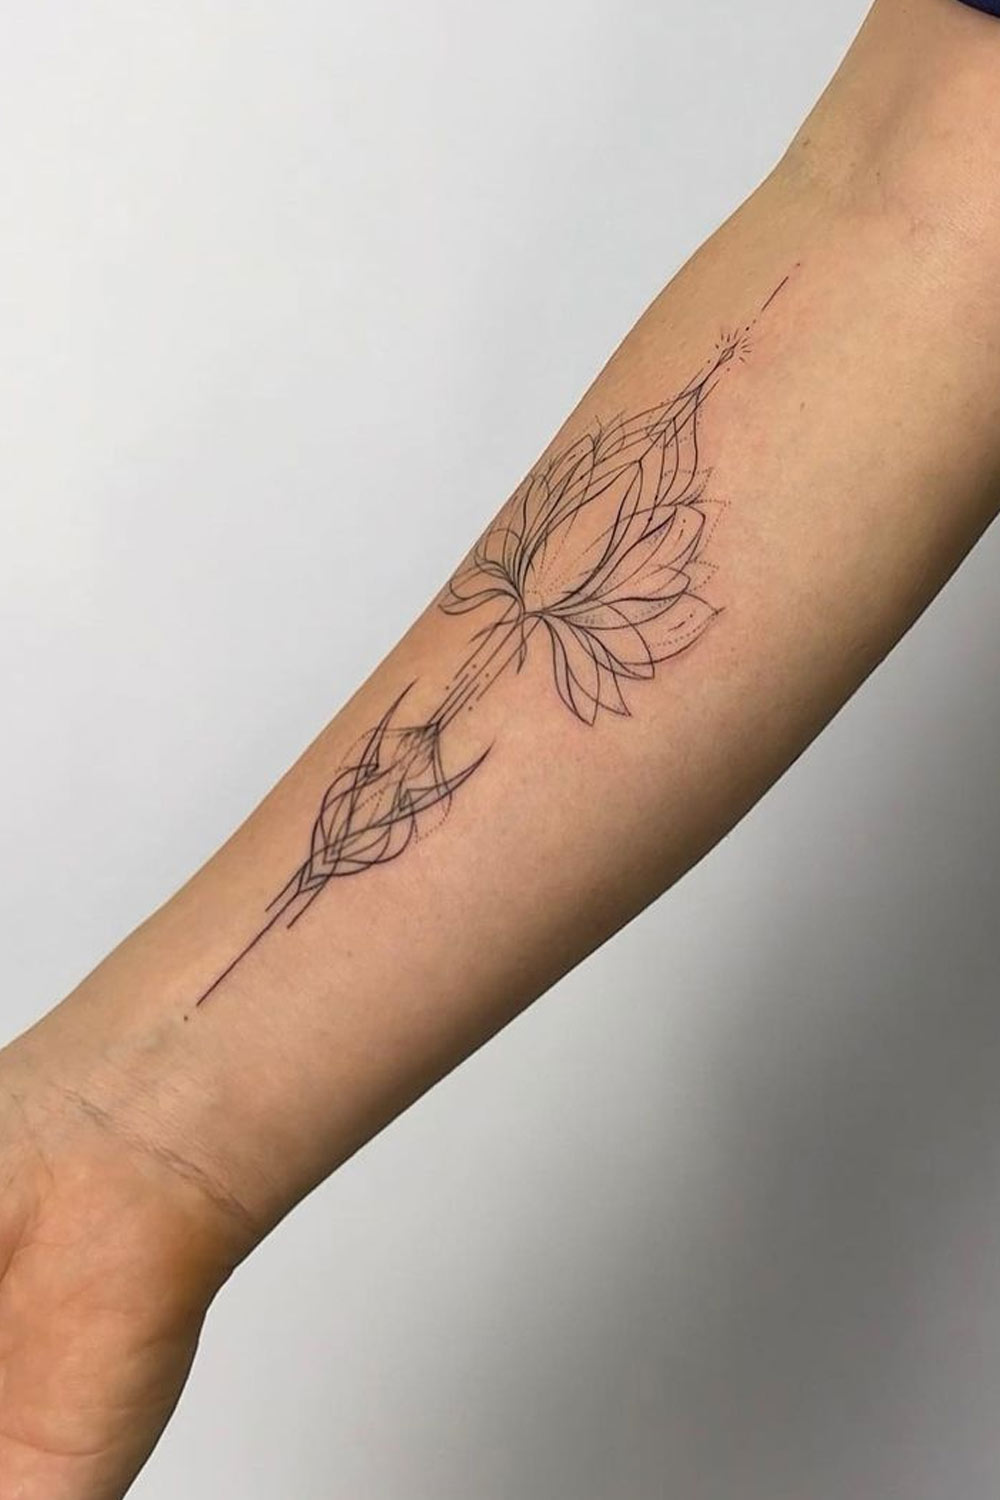 Perfect Flower Forearm Tattoo Ideas for Women  TattooGlee  Forearm tattoo  women Arm tattoos for women forearm Cover up tattoos for women